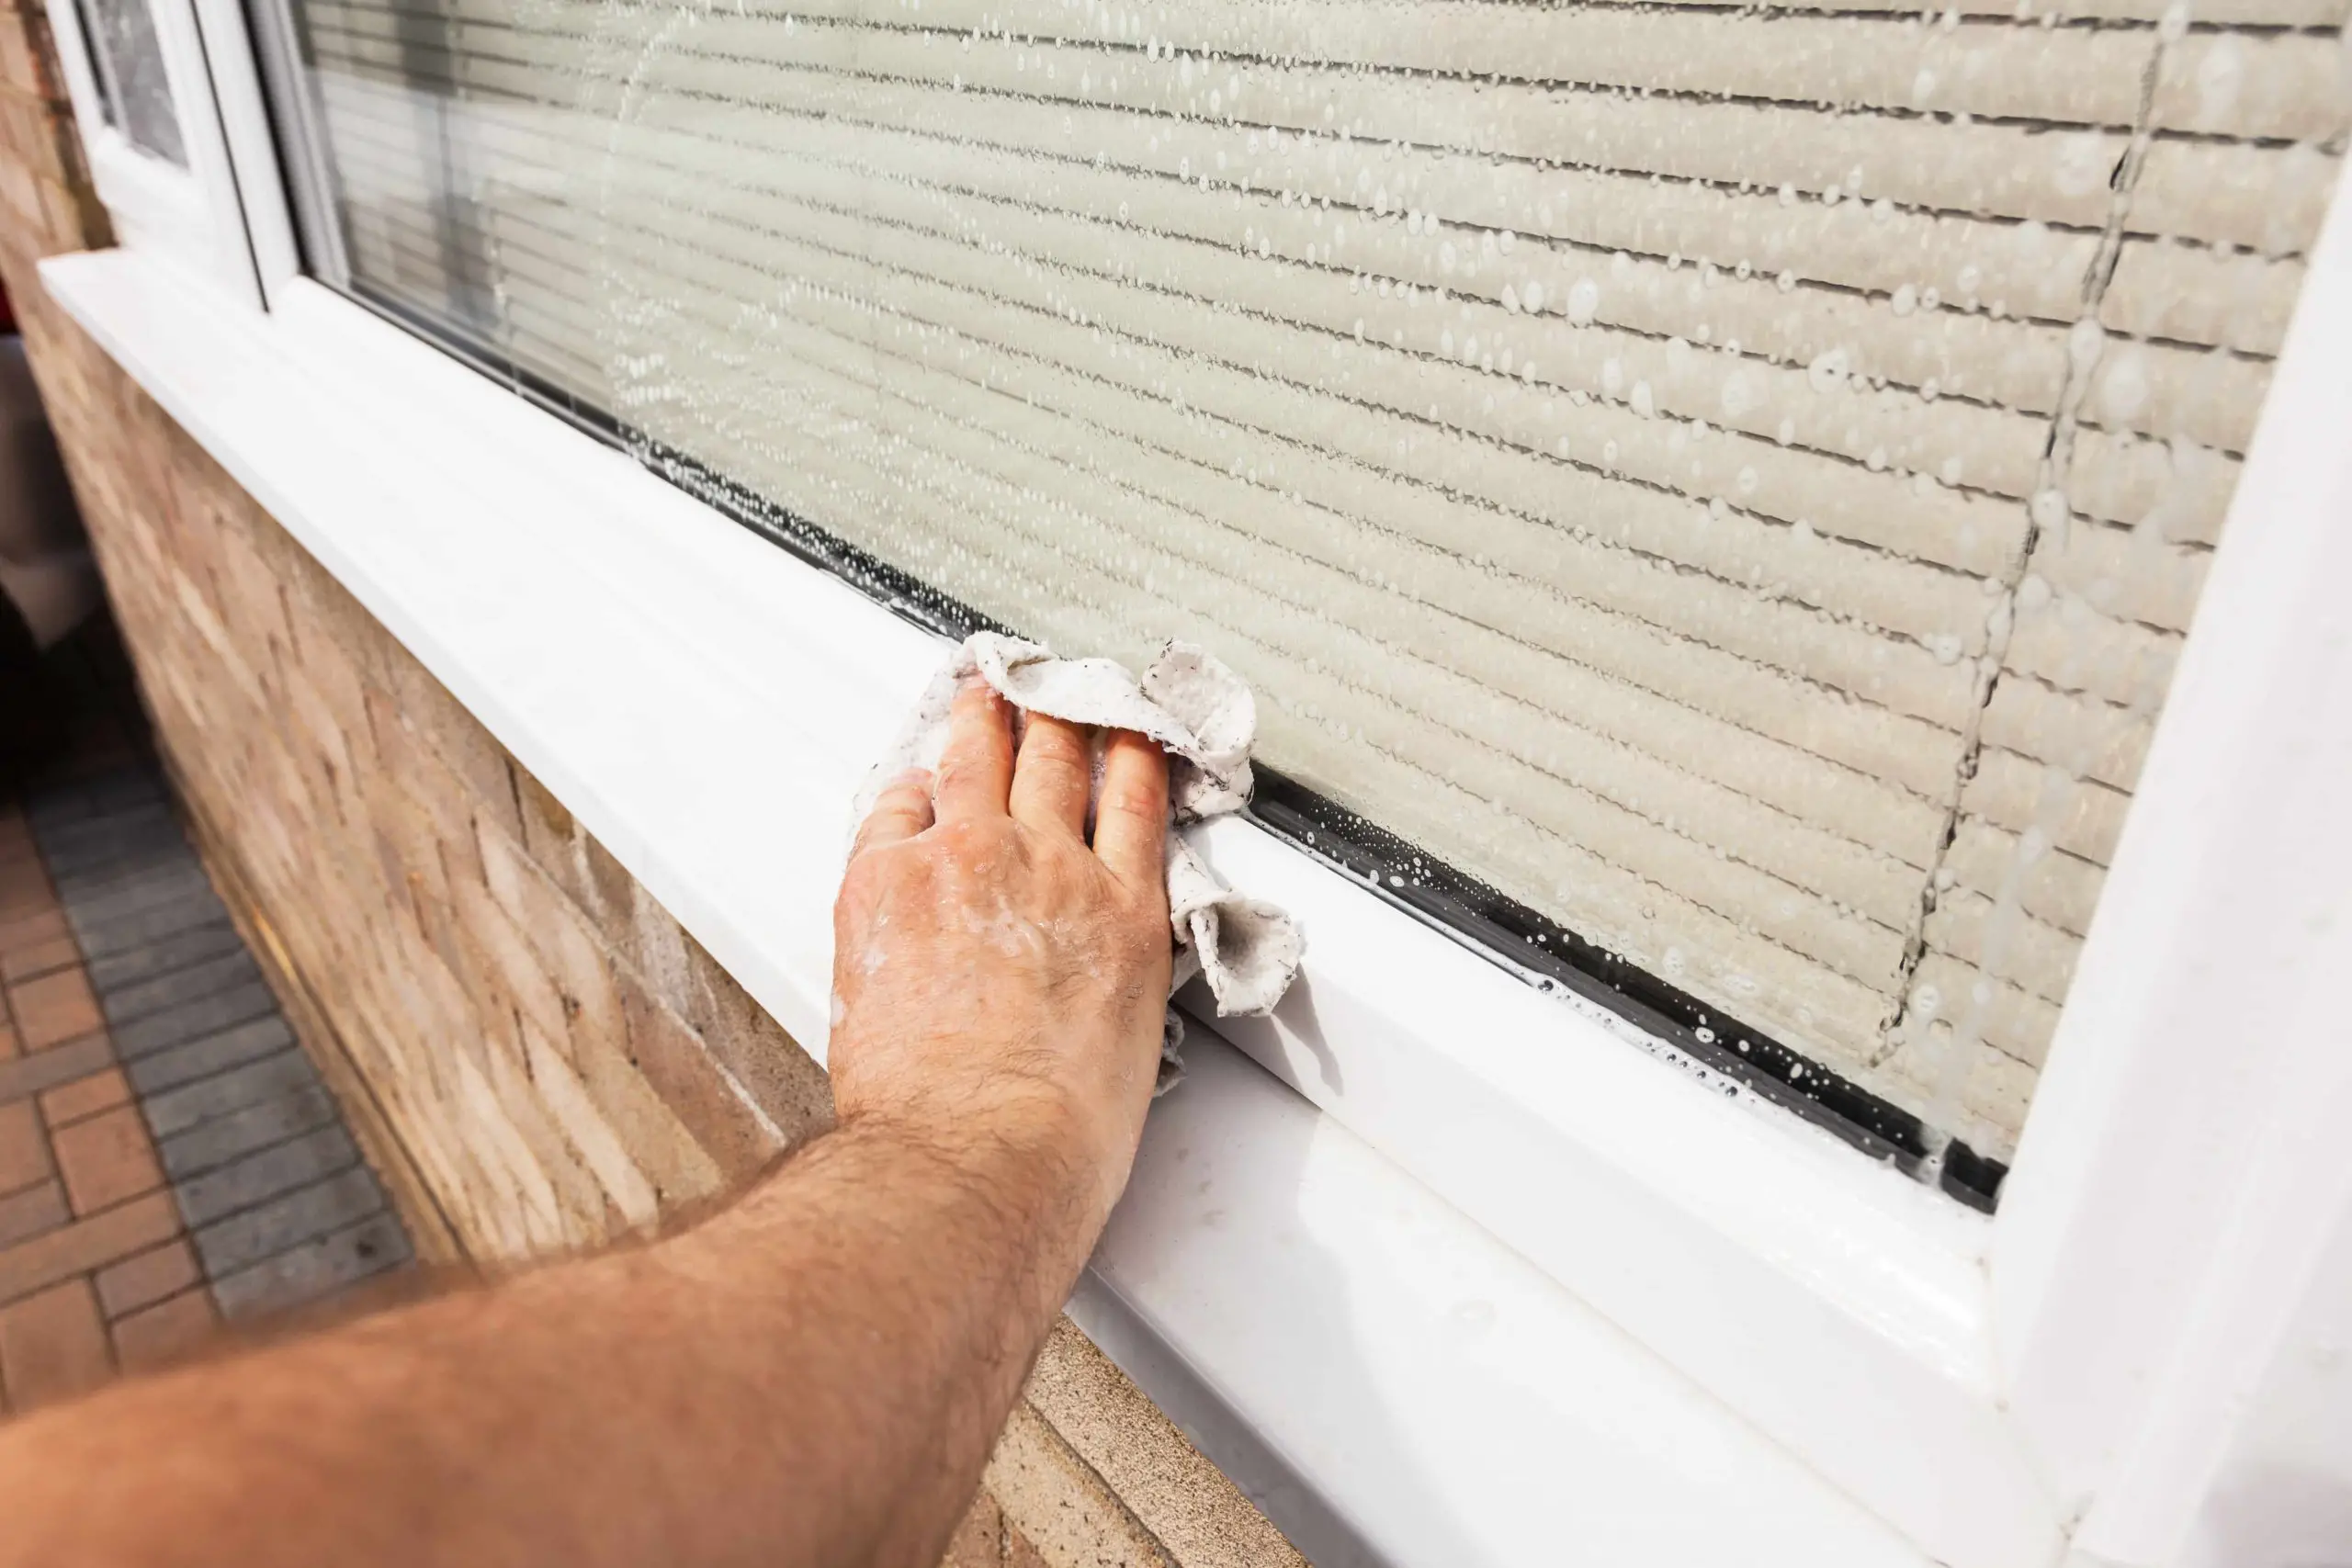 How To Clean Windows, Sills, Screens Without Chemicals